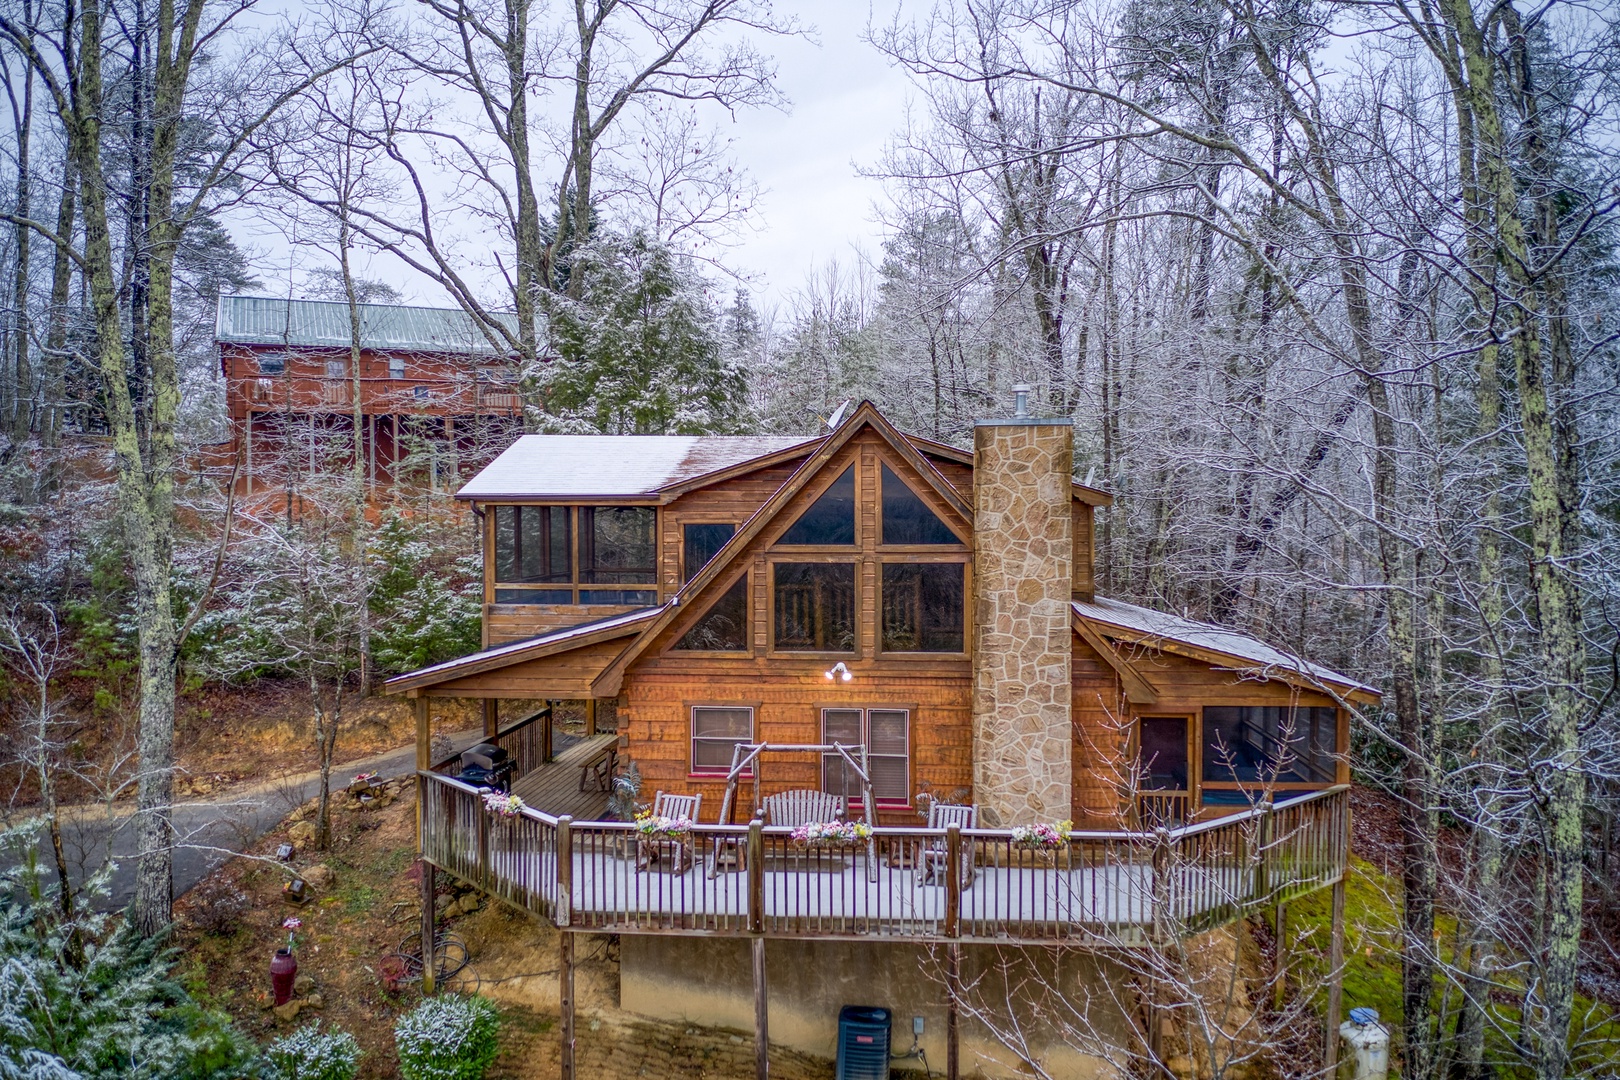 Looking back at Alpine Romance, a 2 bedroom cabin rental located in Pigeon Forge with a dusting of snow